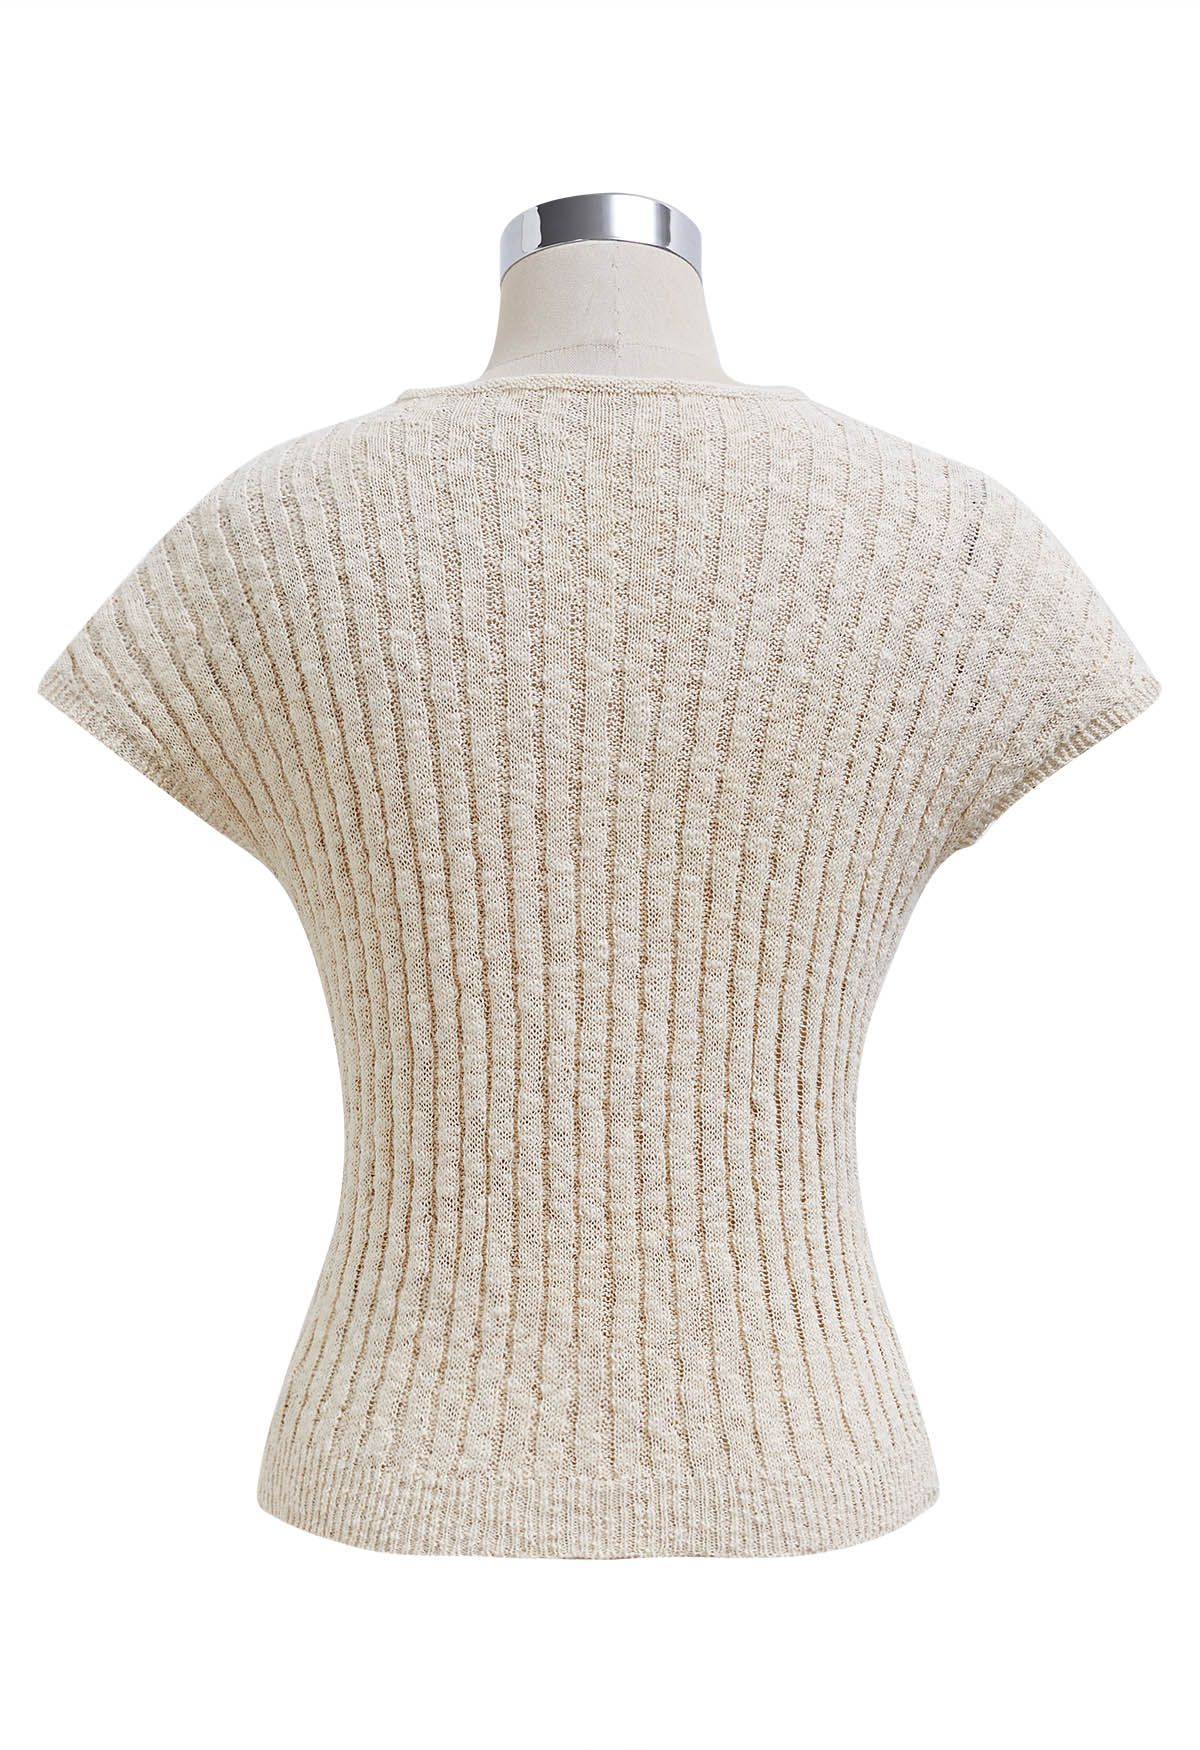 Basic Cap Sleeve Cotton Top in Oatmeal